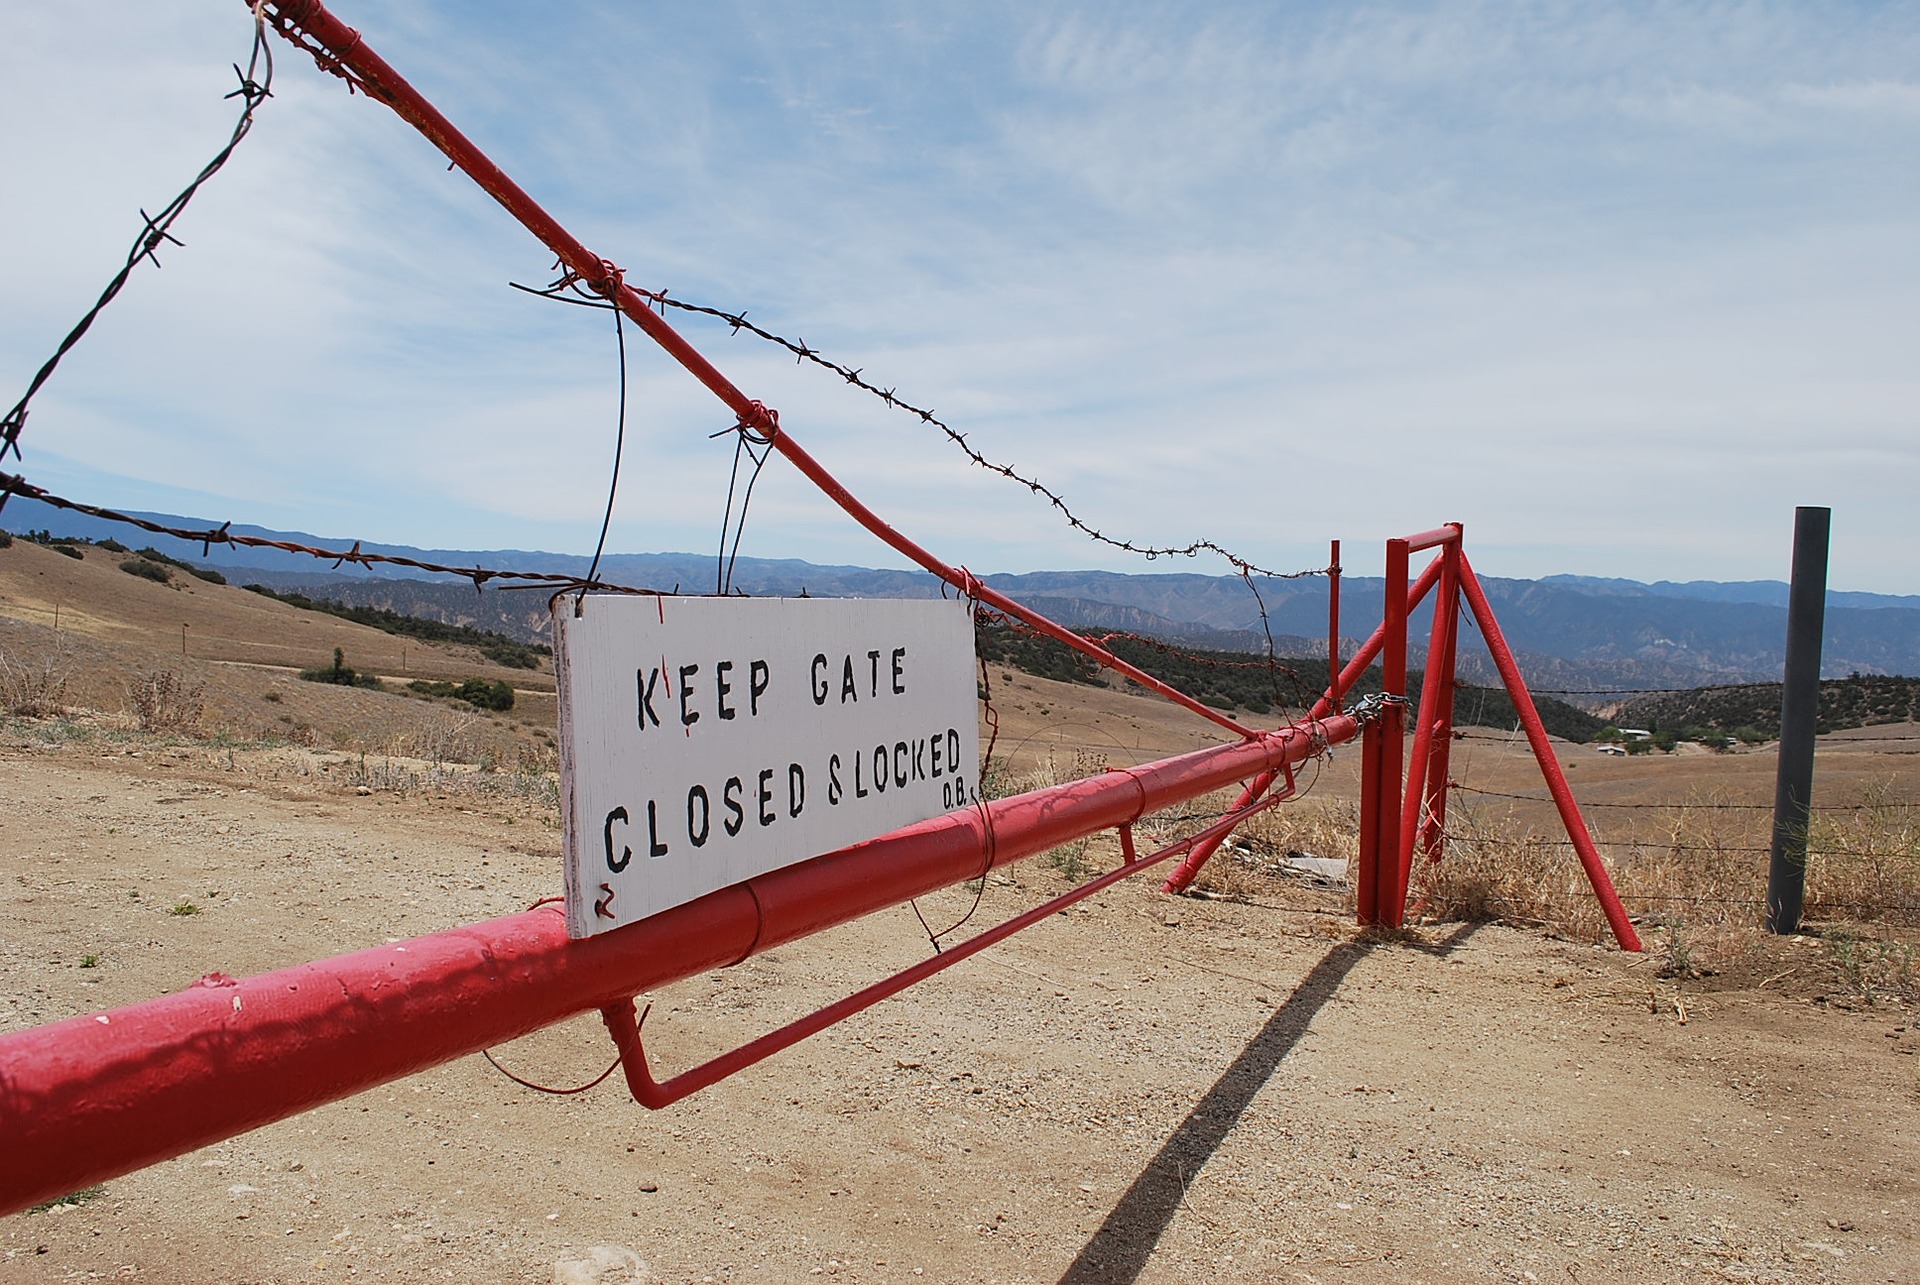 Unwelcome looking gate in arid landscape with barbed wire saying keep gate closed and locked